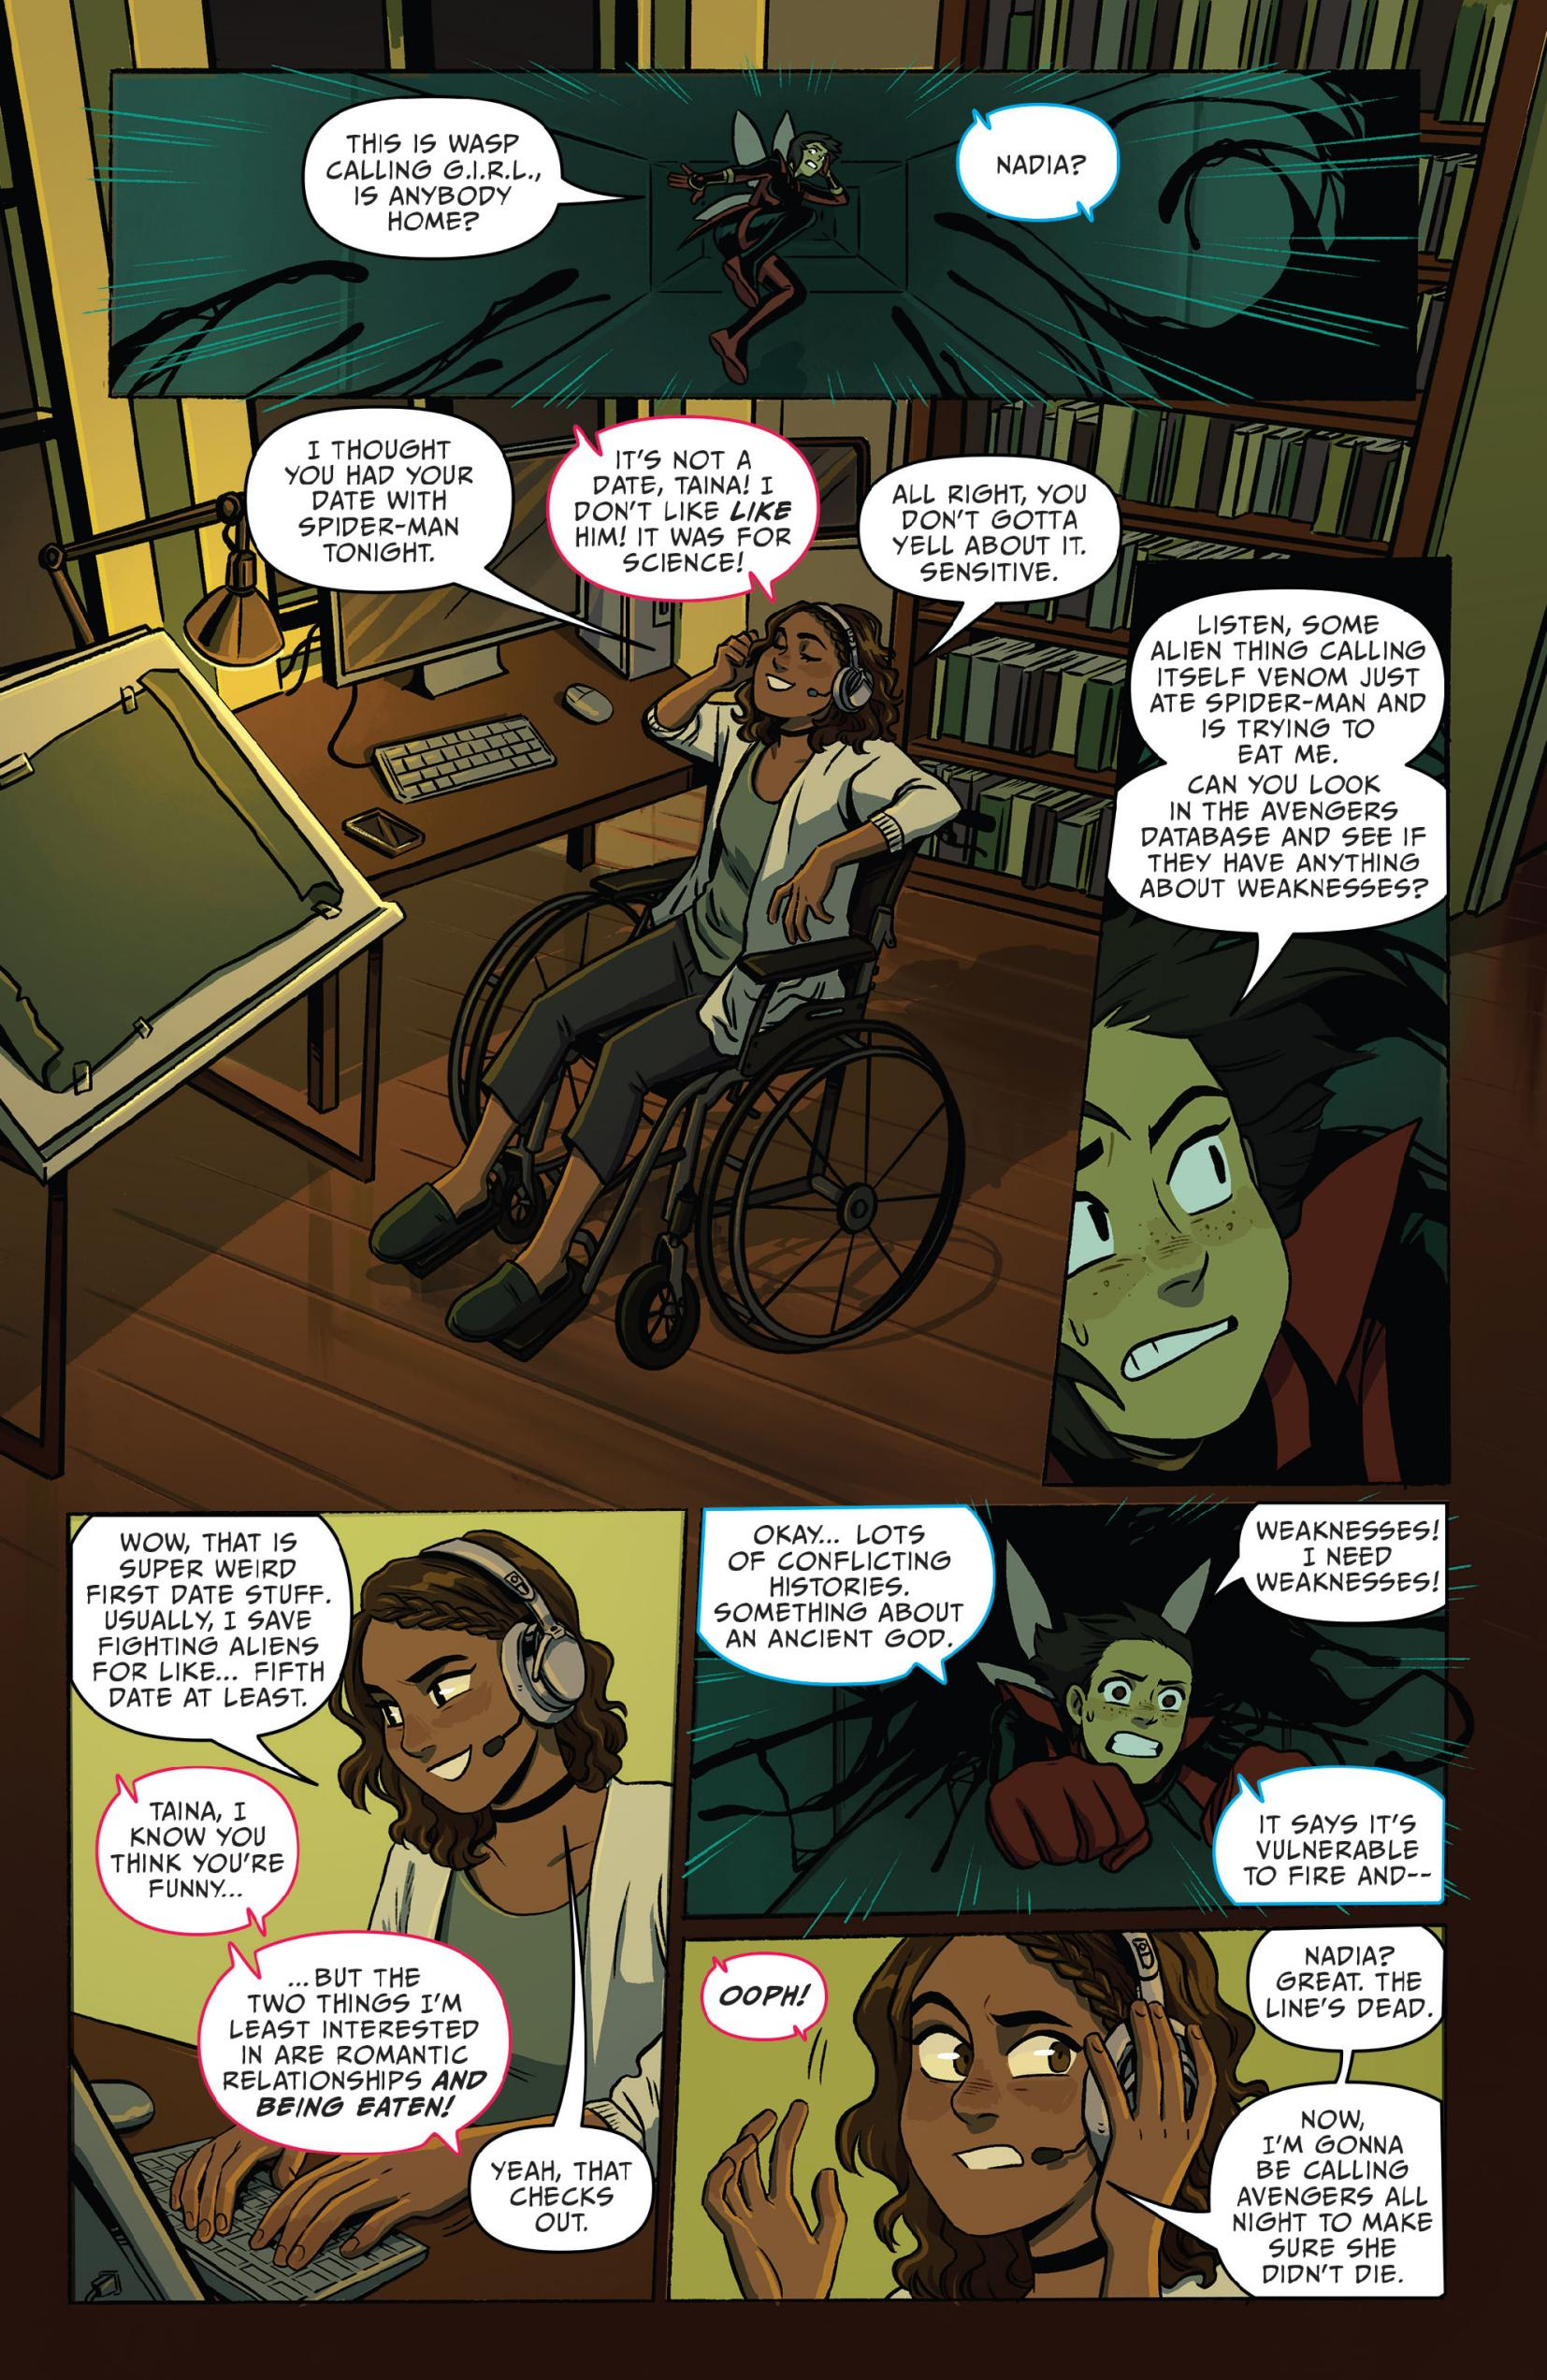 Nadia van Dyne, the Unstoppable Wasp, calls back to her headquarters to ask Tiana of G.I.R.L. for advice on fighting venom. When Tiana makes a joke about Nadia dating Peter Parker, she states that the things she is least interested in includes forming romantic relationships and being eaten.